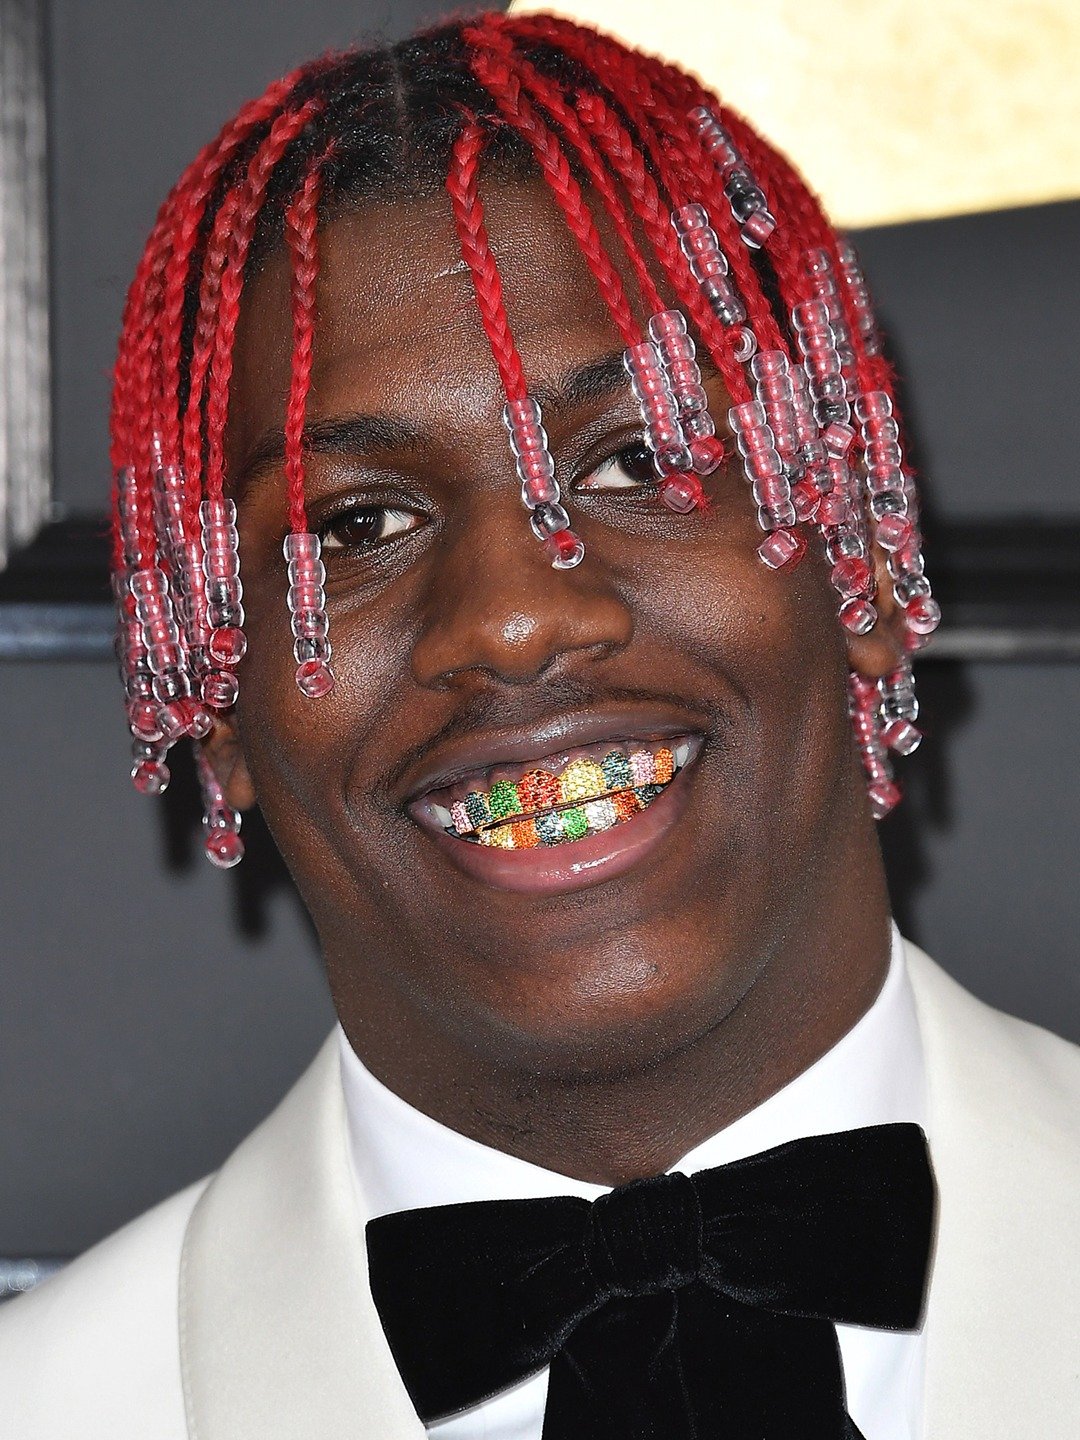 lil yachty star sign